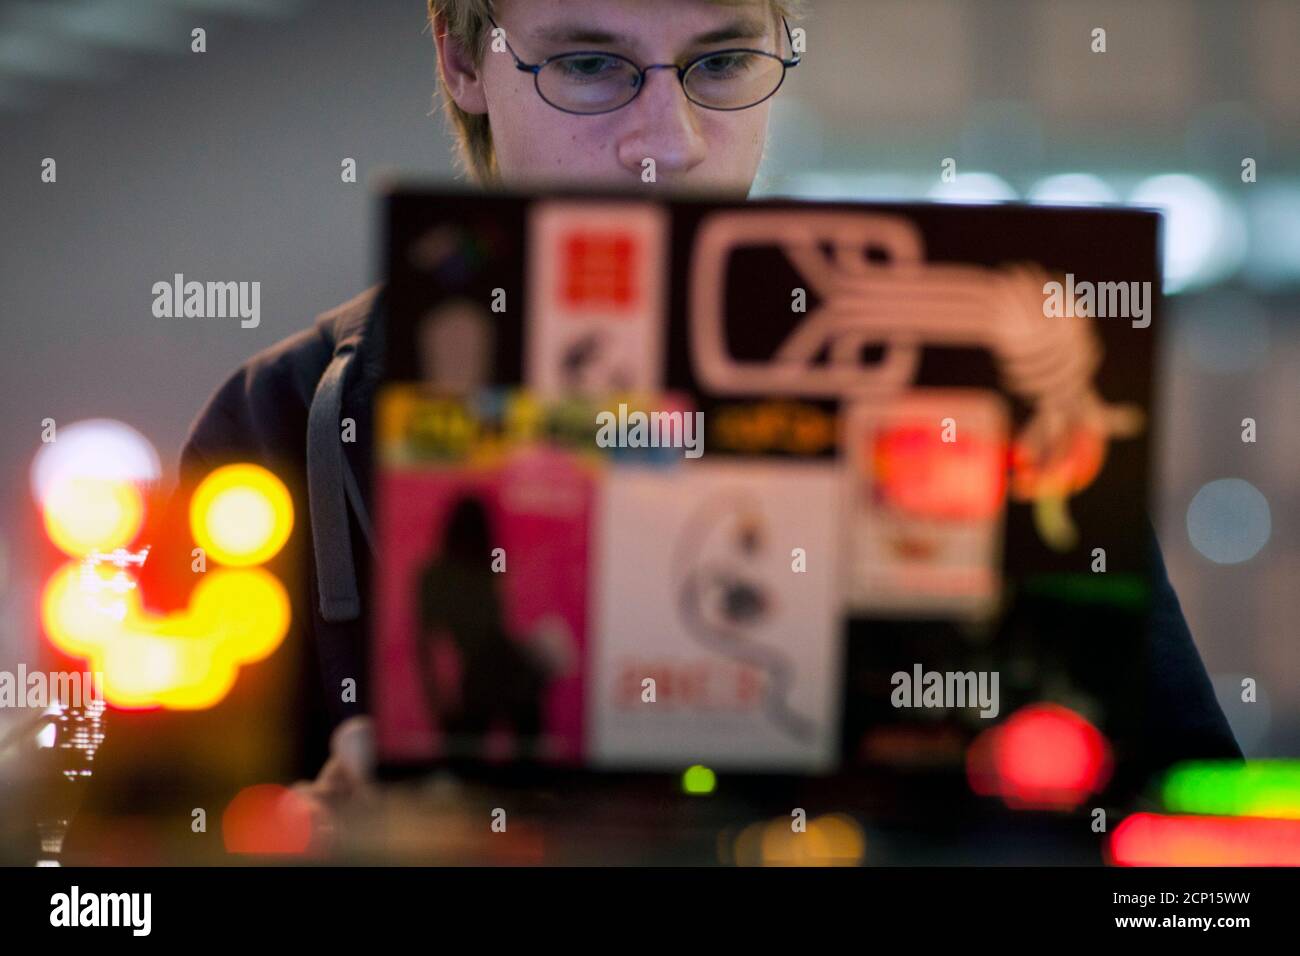 A man uses a computer during the 27th Chaos Communication Congress (27C3) in Berlin, December 27, 2010. The annual four-day conference, organized by the Chaos Computer Club (CCC), offers lectures and workshops and attracts an international audience of hackers, scientists, artists, and utopians.  REUTERS/Thomas Peter (GERMANY - Tags: SCI TECH SOCIETY) Stock Photo